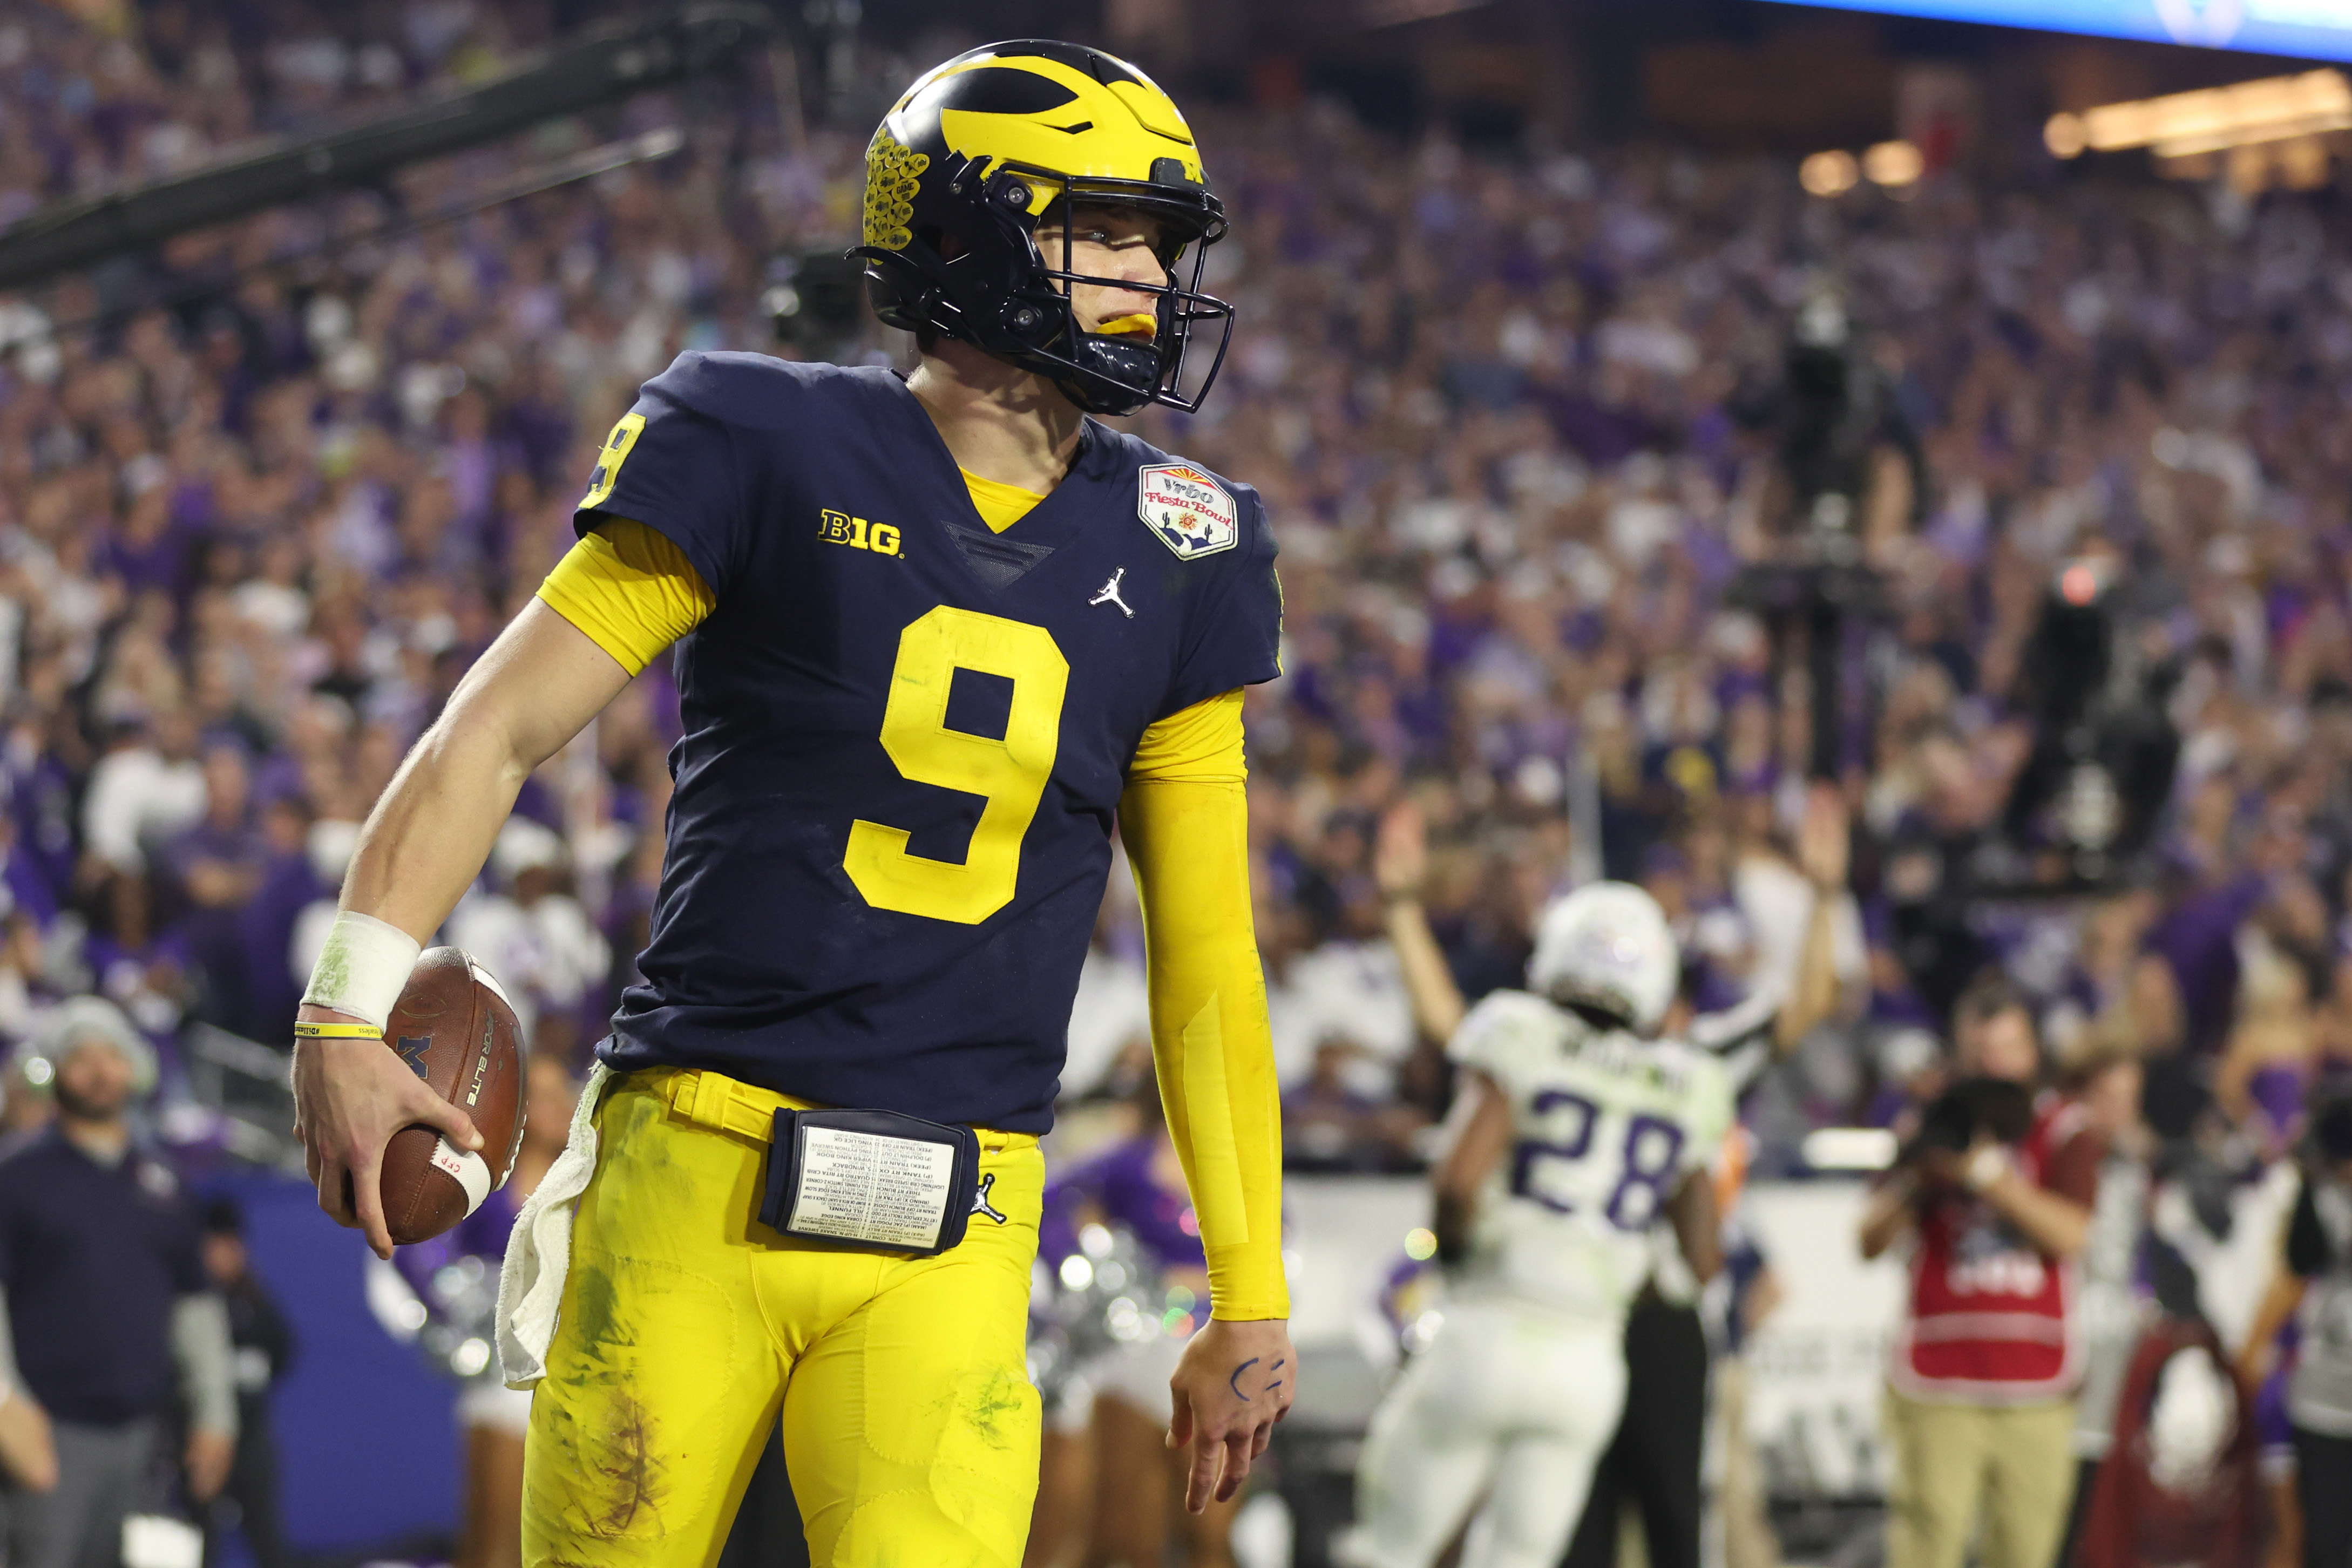 J.J. McCarthy #9 of the Michigan Wolverines reacts after rushing for a touchdown during the third quarter against the TCU Horned Frogs in the Vrbo Fiesta Bowl at State Farm Stadium on December 31, 2022 in Glendale, Arizona.